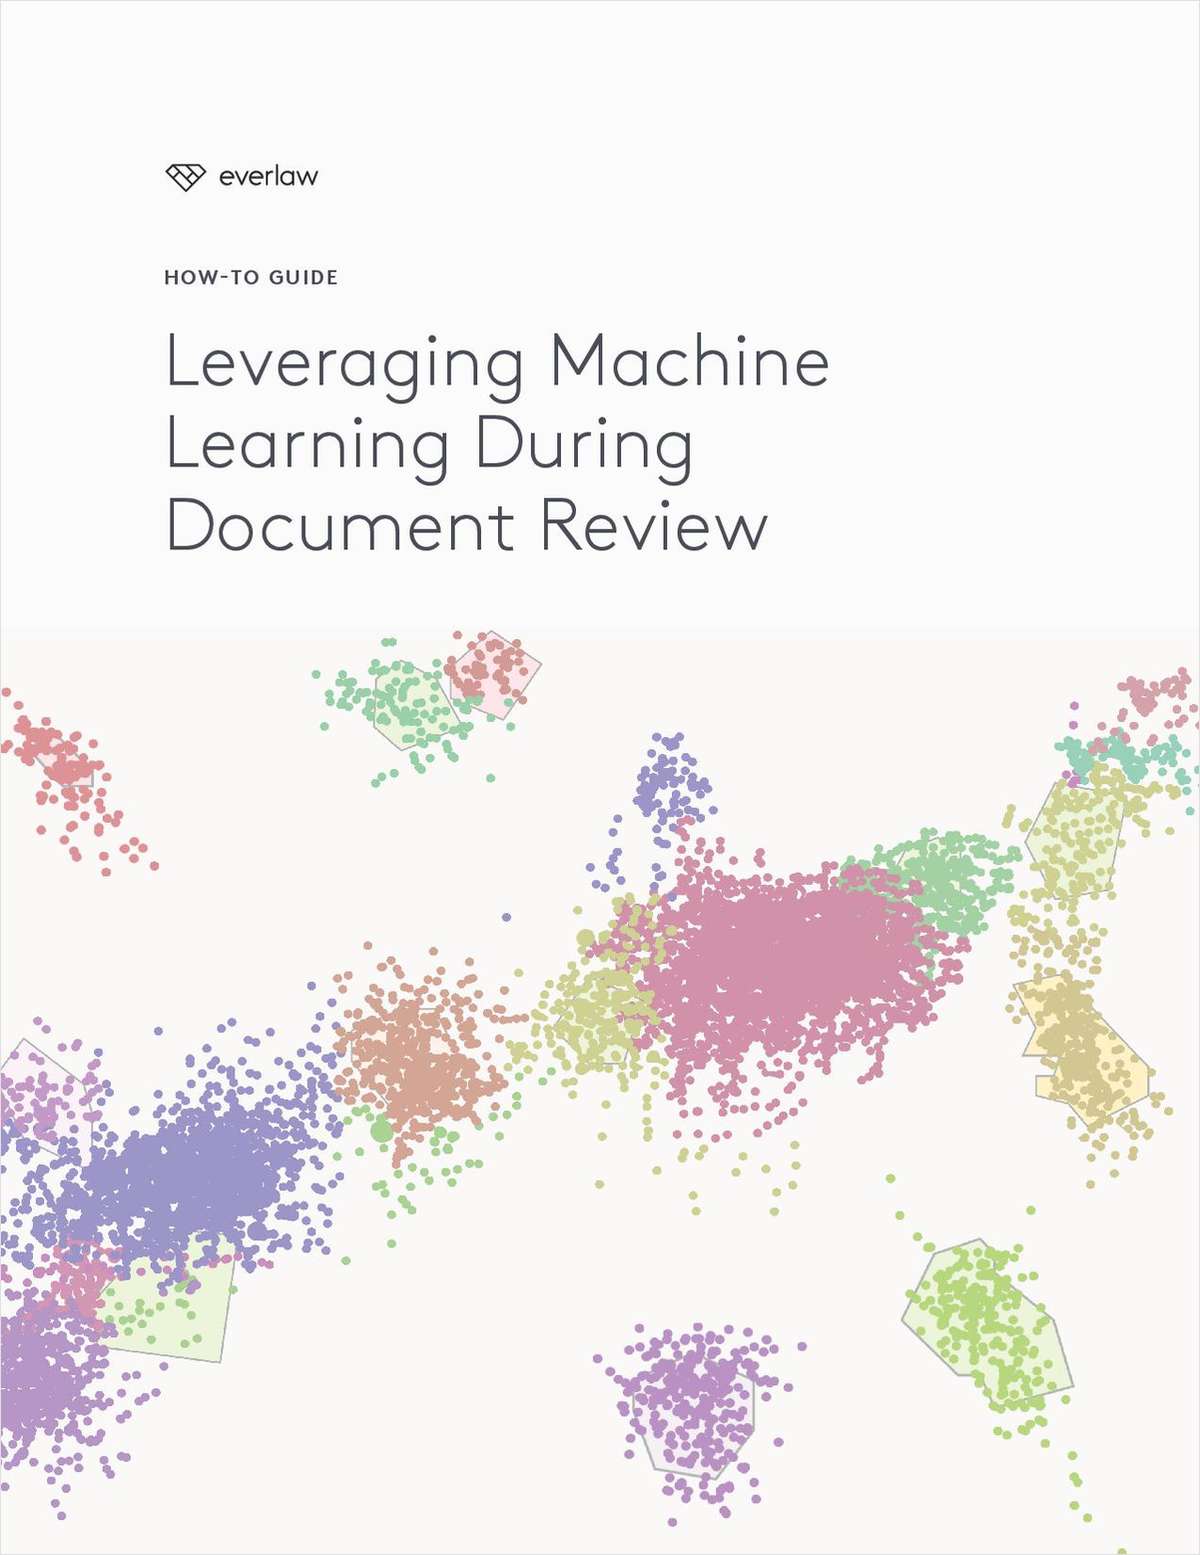 Leveraging Machine Learning During Document Review: A How-to Guide